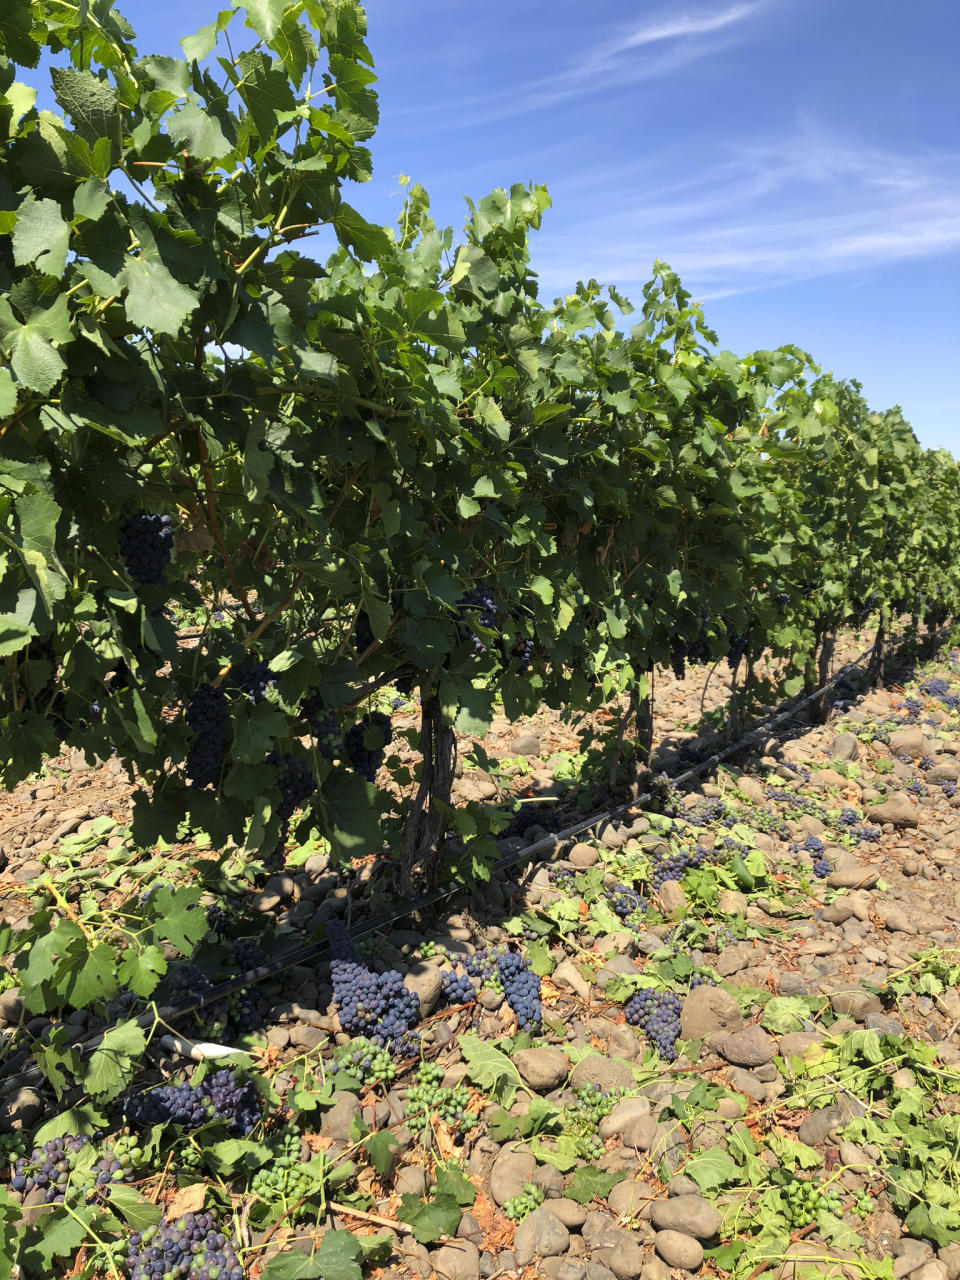 This Aug. 12, 2019 photo shows wine grapes growing amid the stones in the River Rock Vineyard in Milton-Freewater, Oregon. Southeastern Washington has been producing high-quality wines for decades. But in the past five years, the wineries of the Walla Walla Valley have drawn international accolades for the reds produced from the unique soil just across the border in Oregon.(AP Photo/Sally Carpenter Hale)